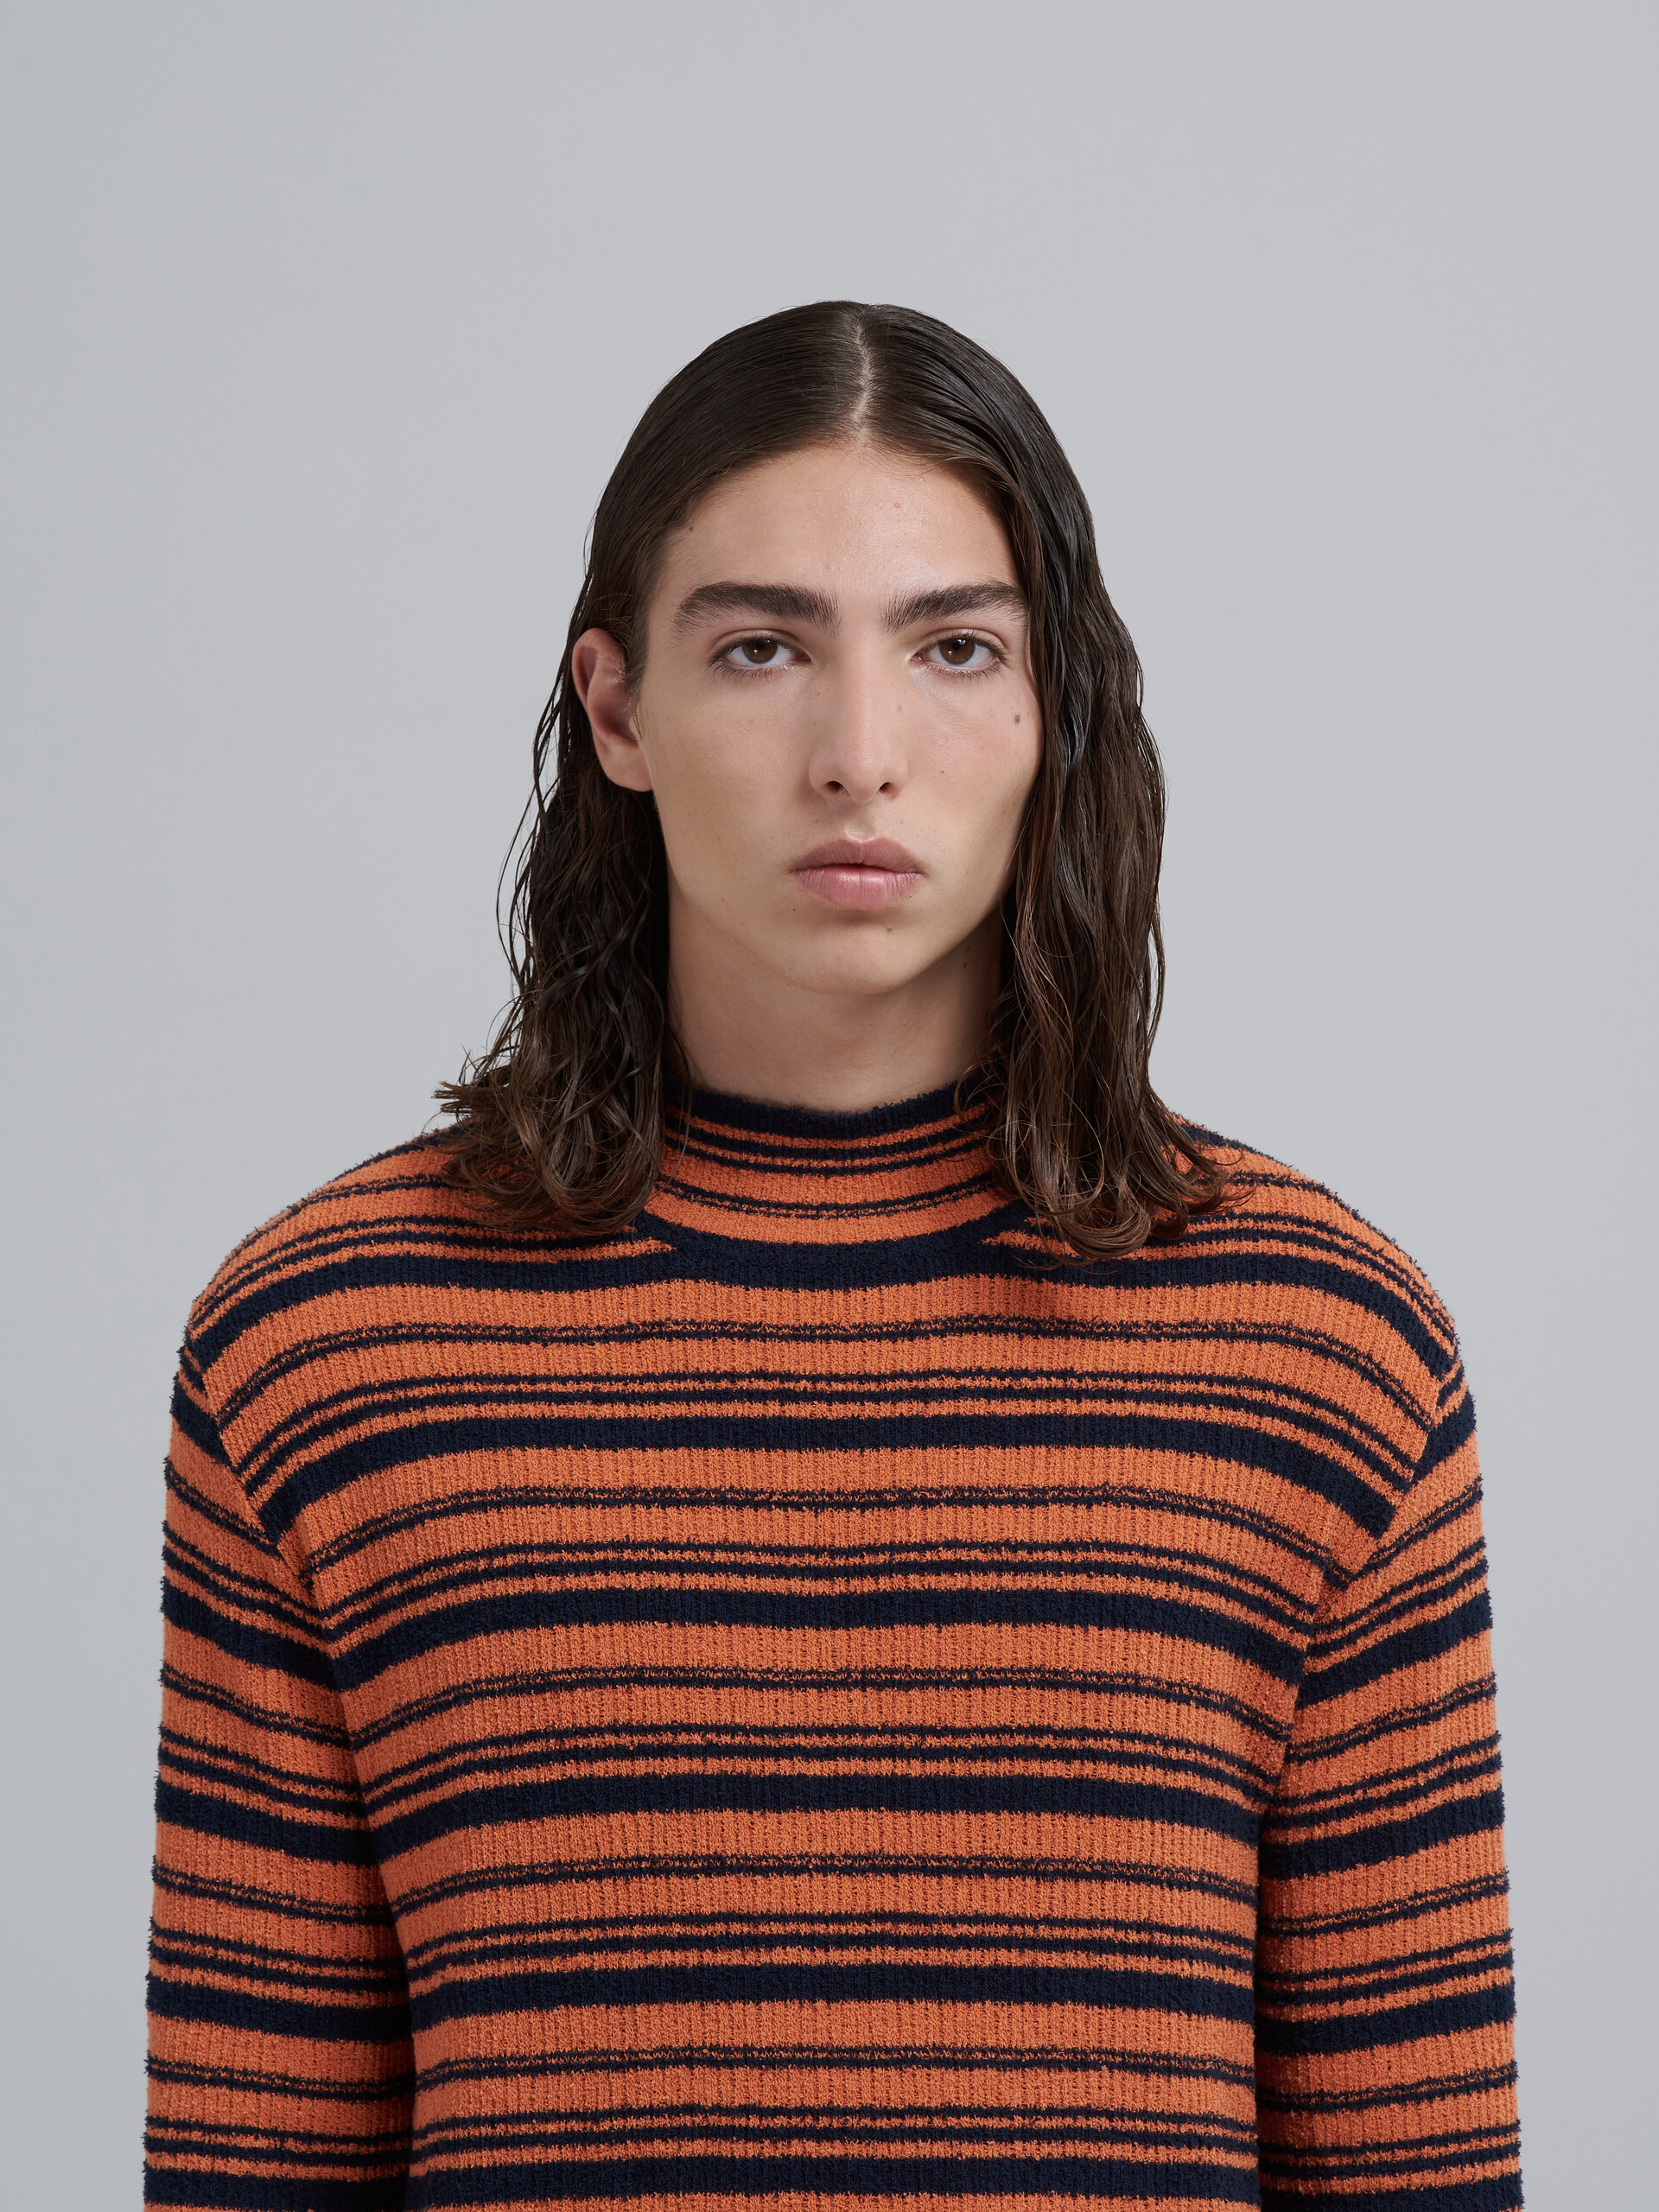 Terry-cloth effect striped cotton blend sweater - Pullovers - Image 4